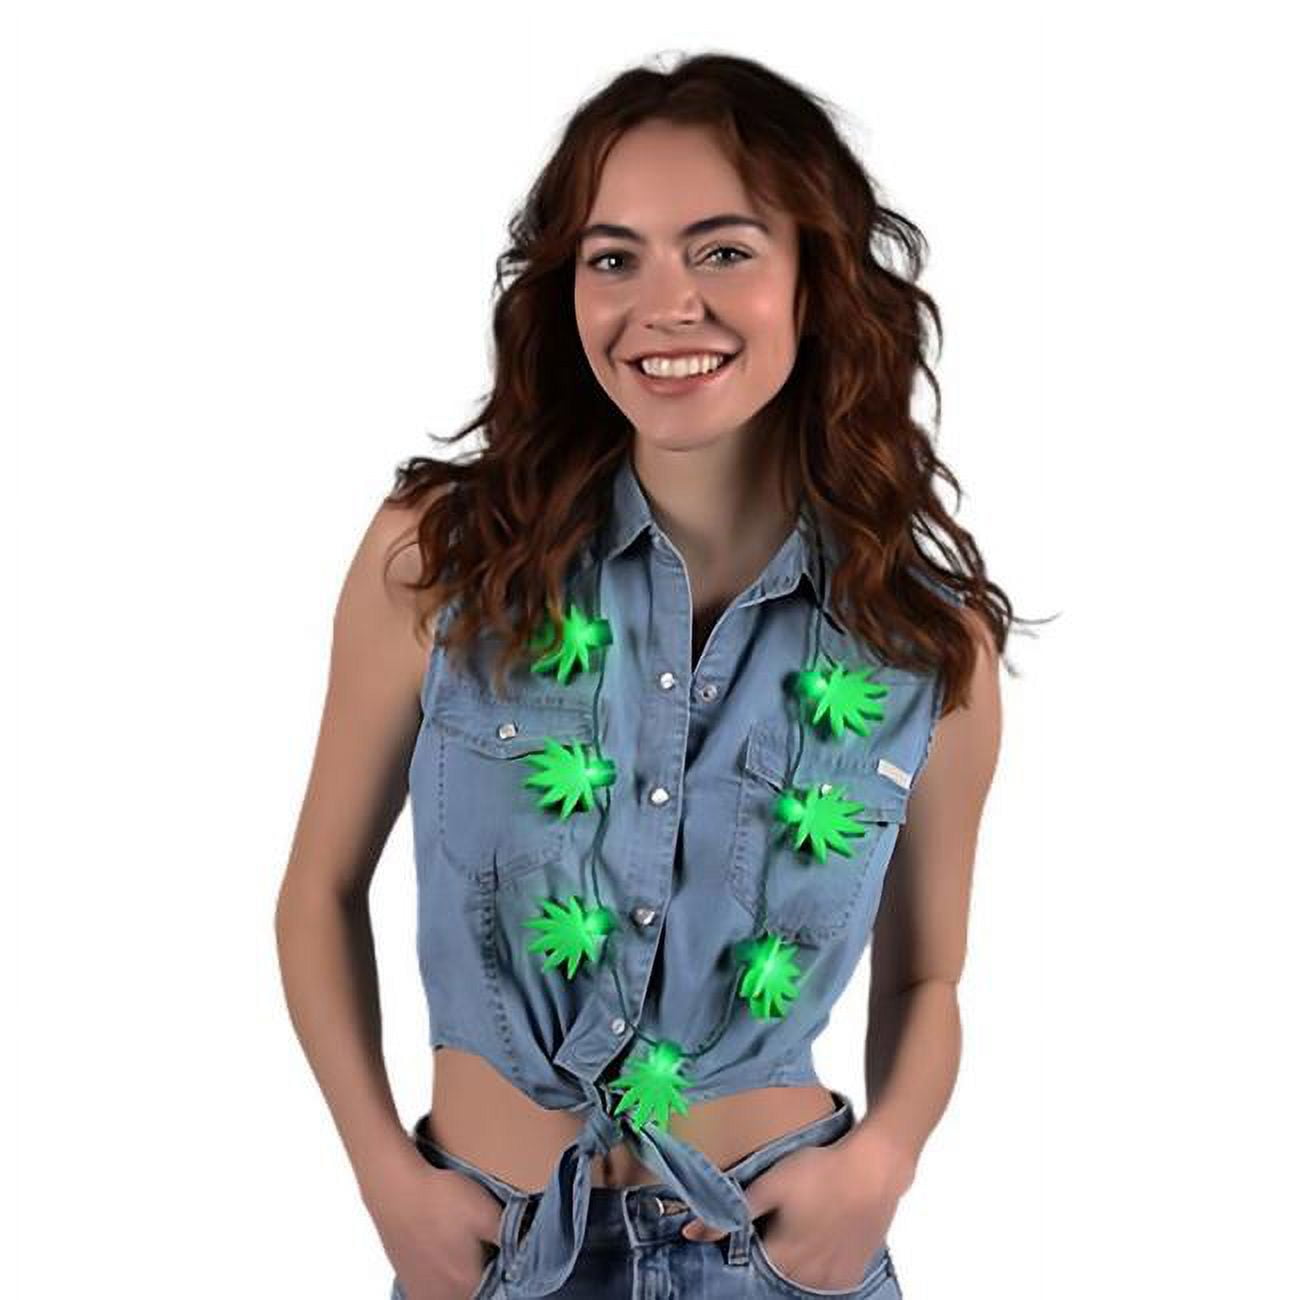 Picture of Blinkee LLUFPLJC-GN Light Up Flashing Pot Leaf Jumbo Charms Necklace